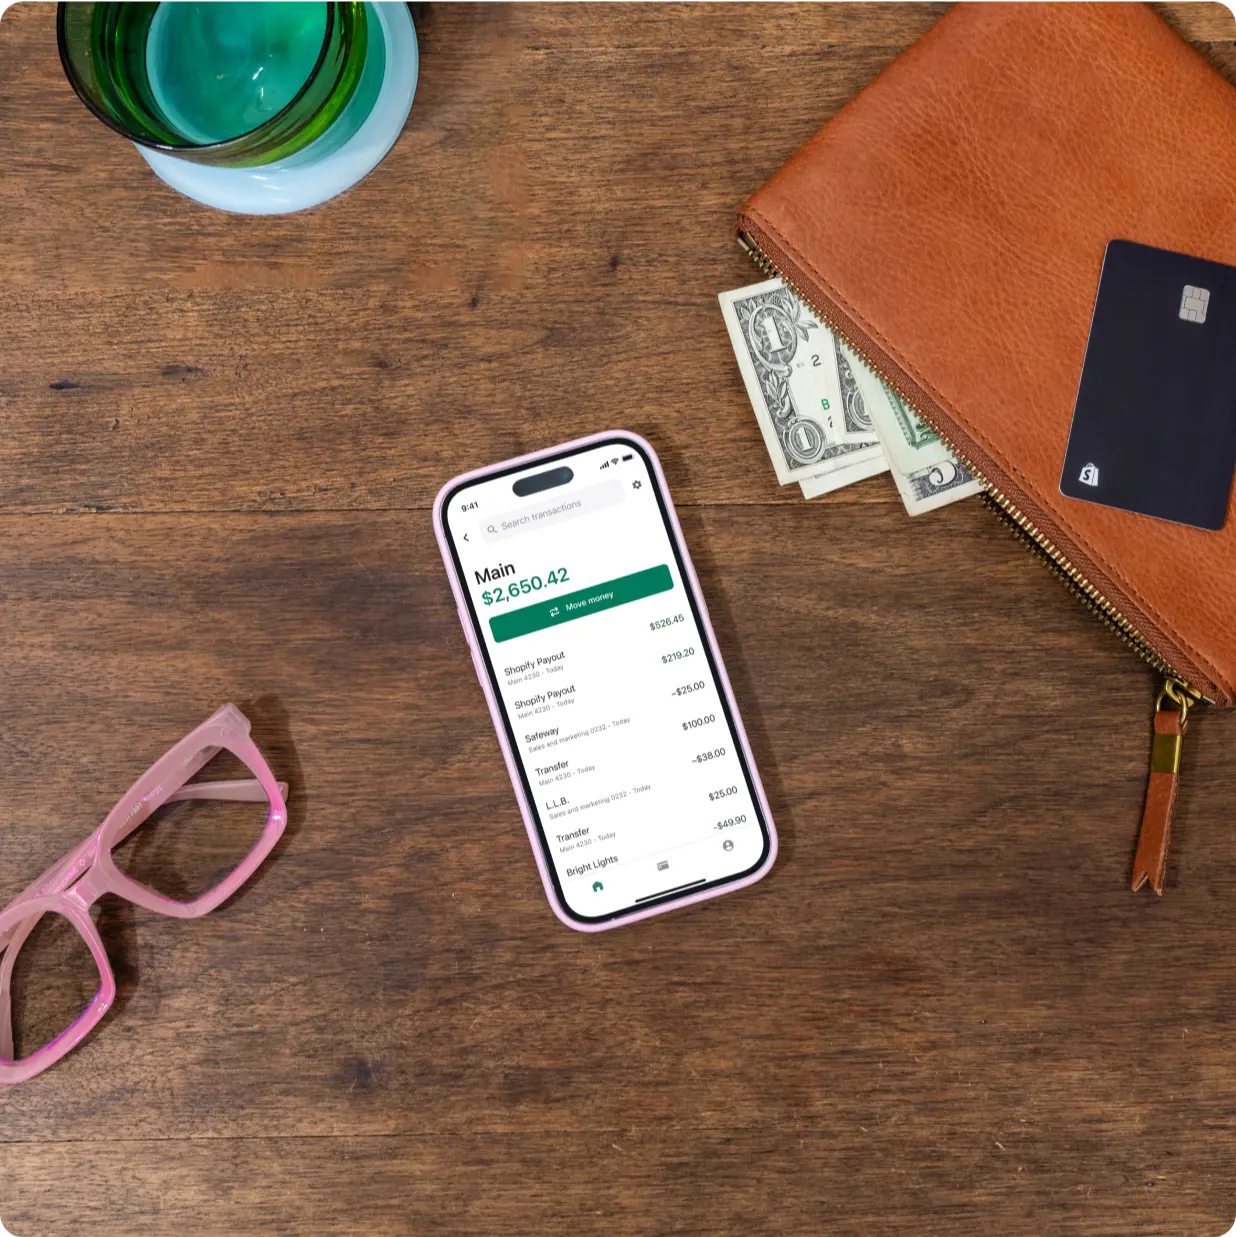 A mobile device on a wooden desk displays a Shopify Balance account balance, recent transactions, and a button that reads, “Move money.” Pink glasses, a wallet with US currency, and a green glass surround the phone on the desk.